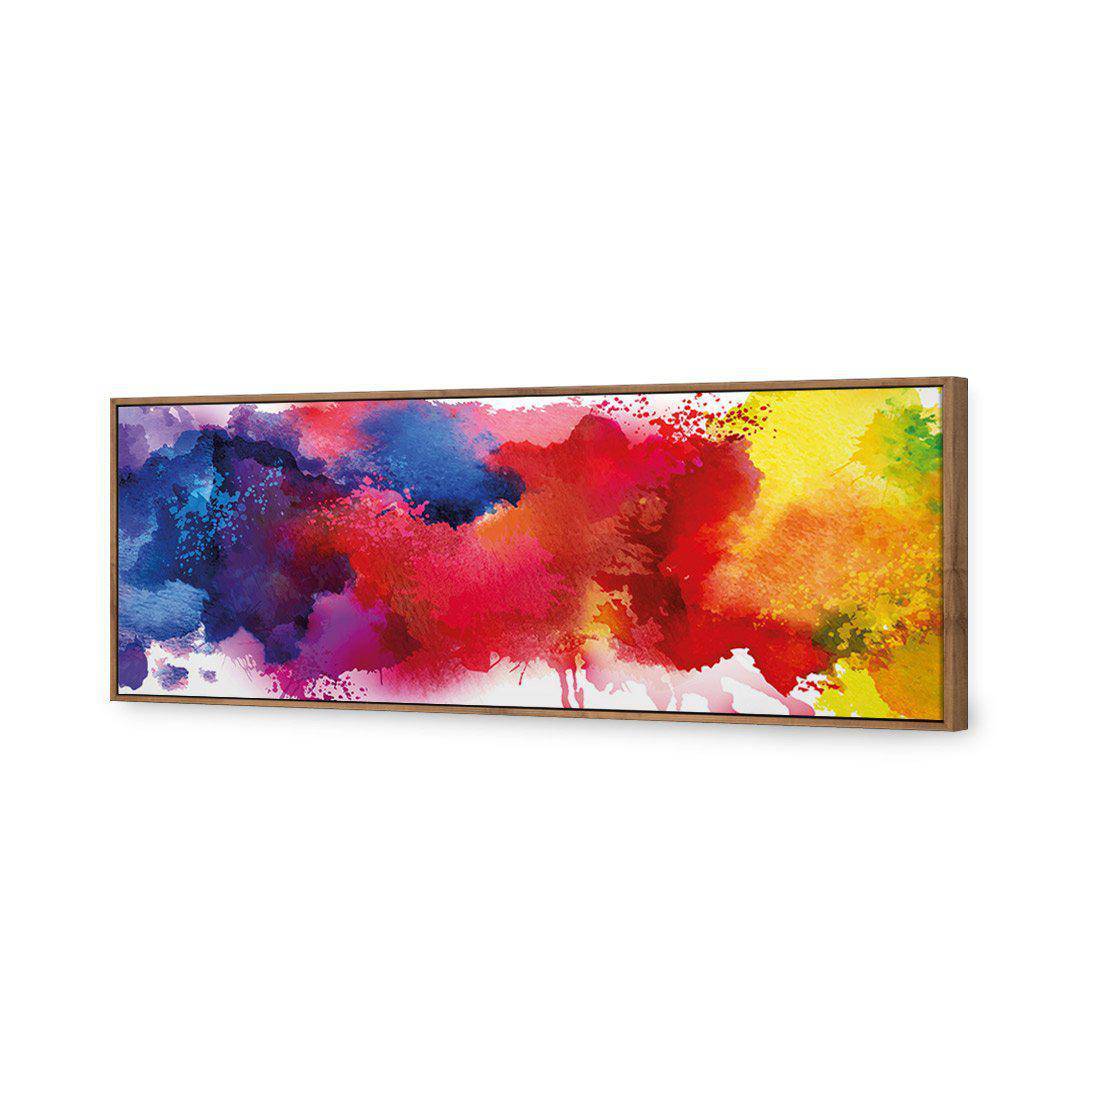 Primary Stains Canvas Art-Canvas-Wall Art Designs-60x20cm-Canvas - Natural Frame-Wall Art Designs